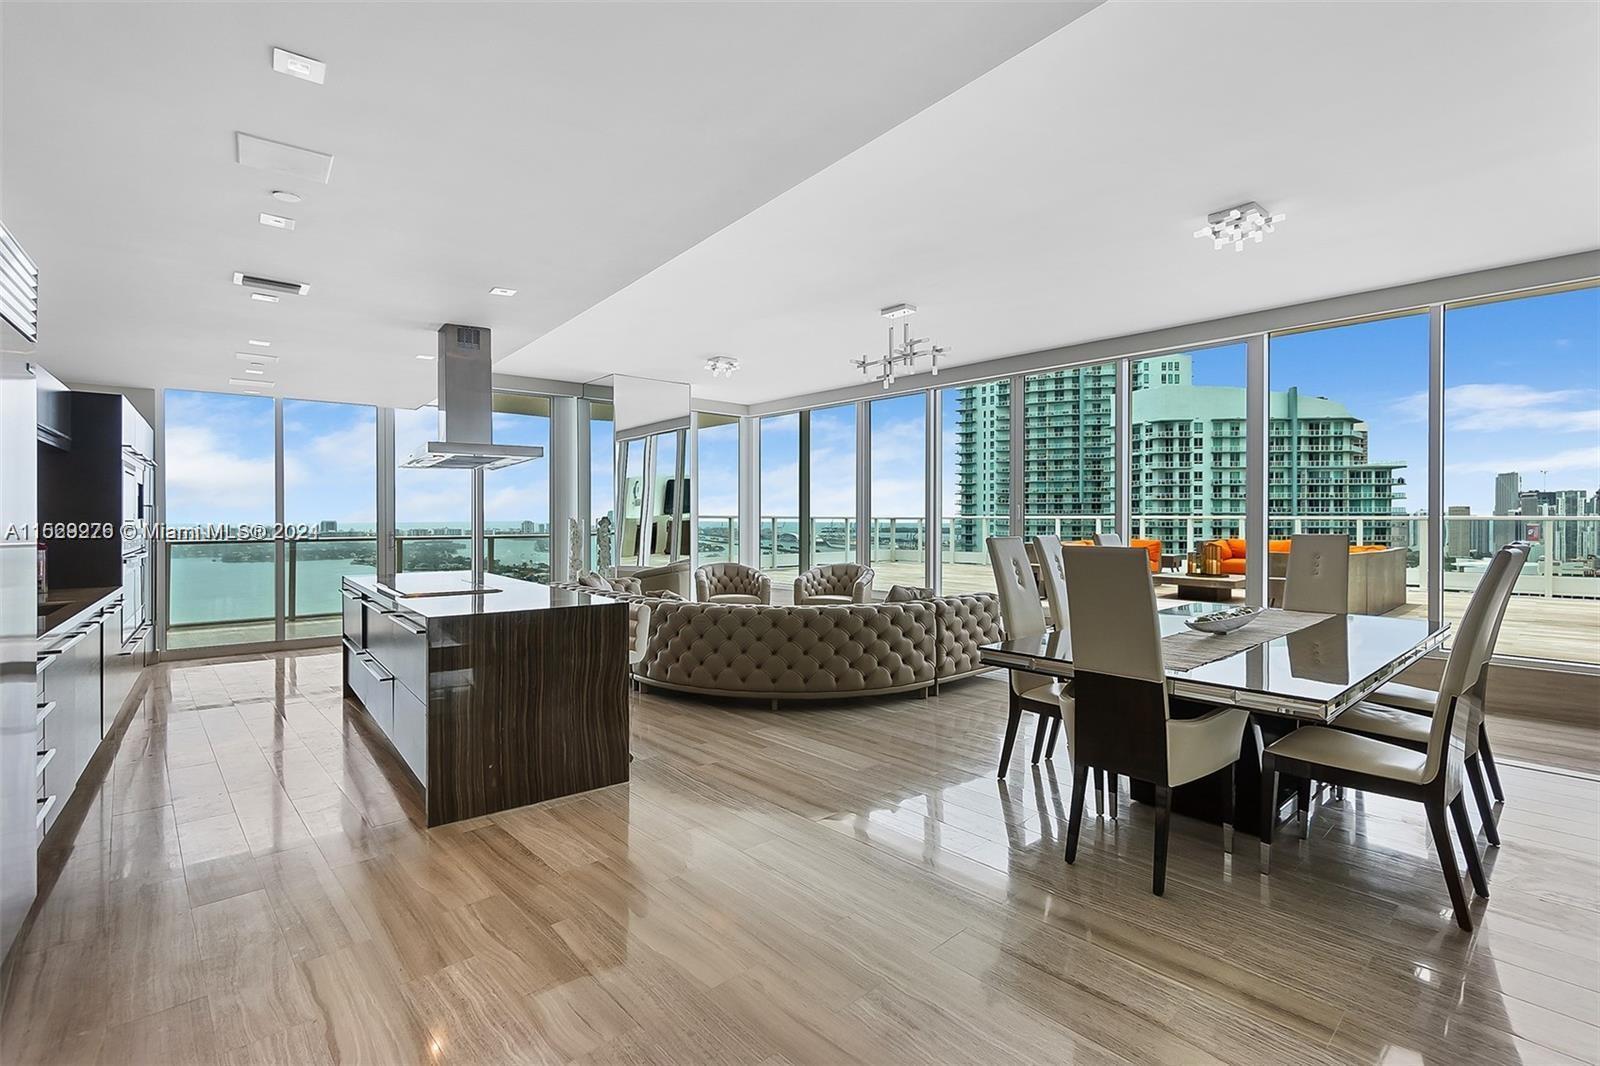 An absolute one of a kind designer Penthouse perched over Biscayne bay with sweeping 270 degree view